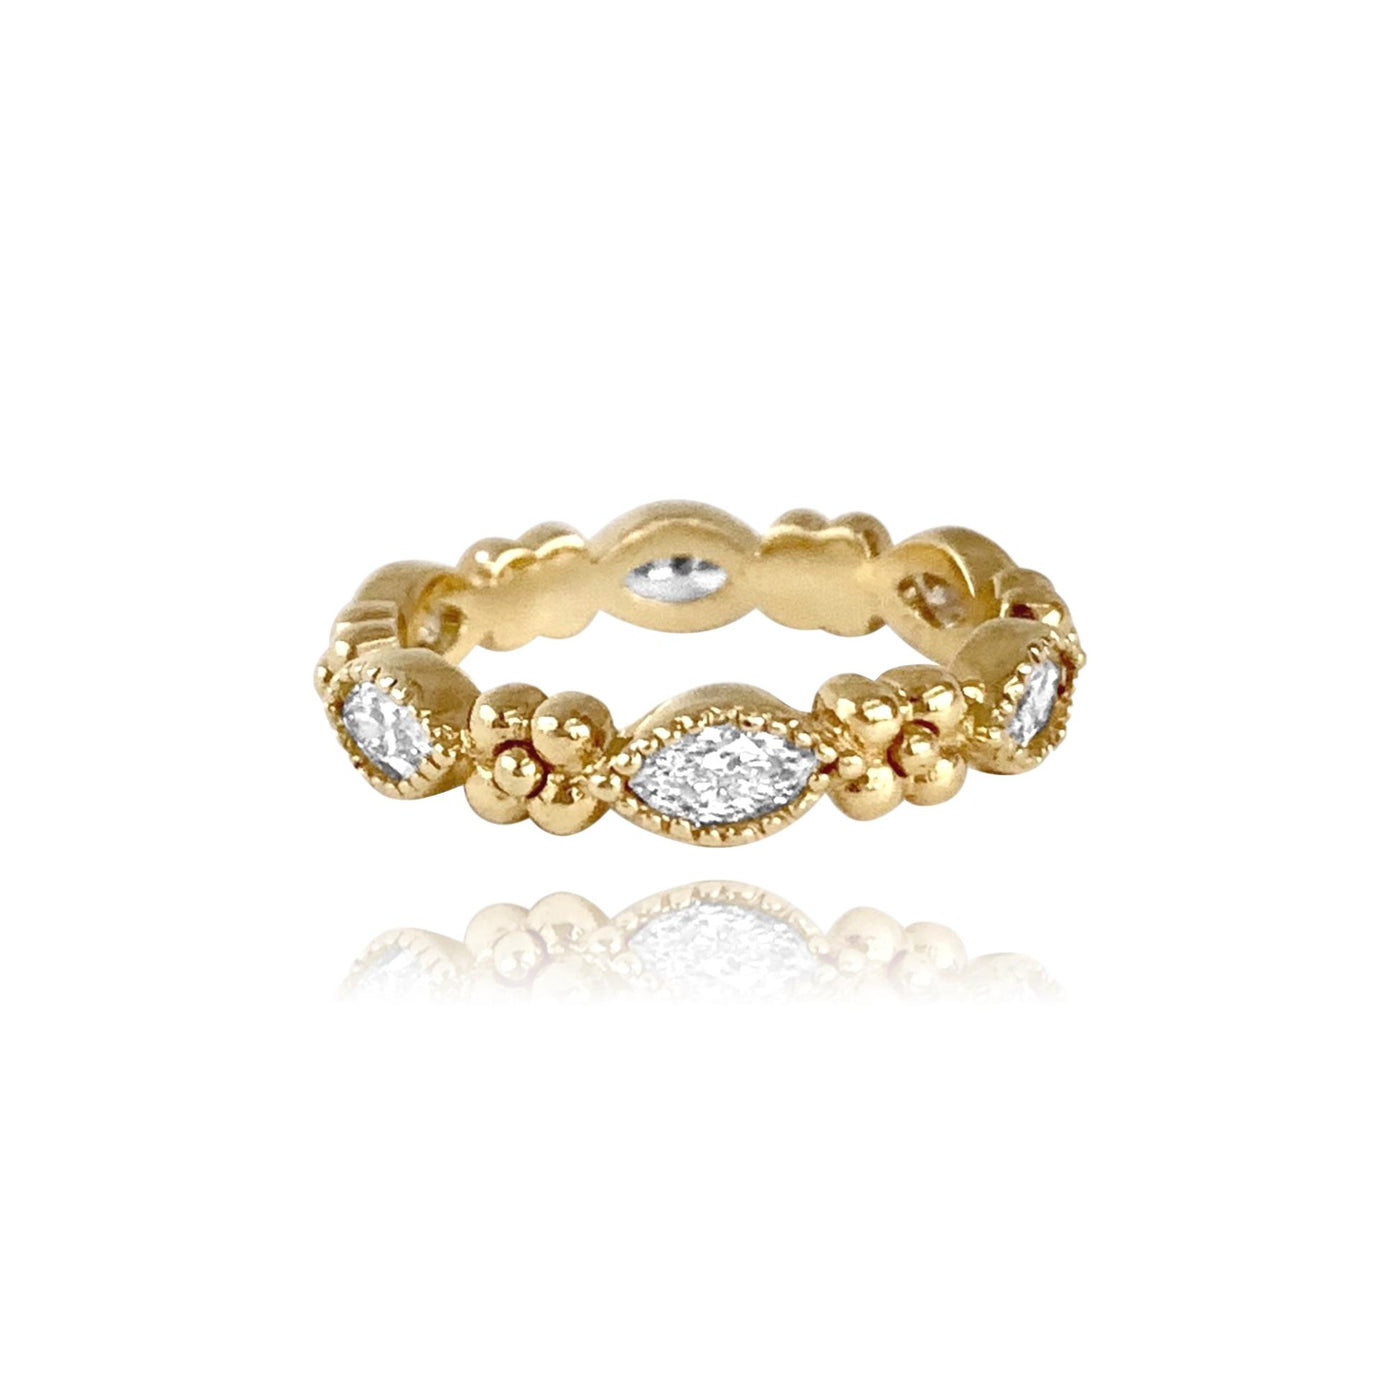 Iris Marquis Band in 18k Gold with Diamonds - Lauren Sigman Collection